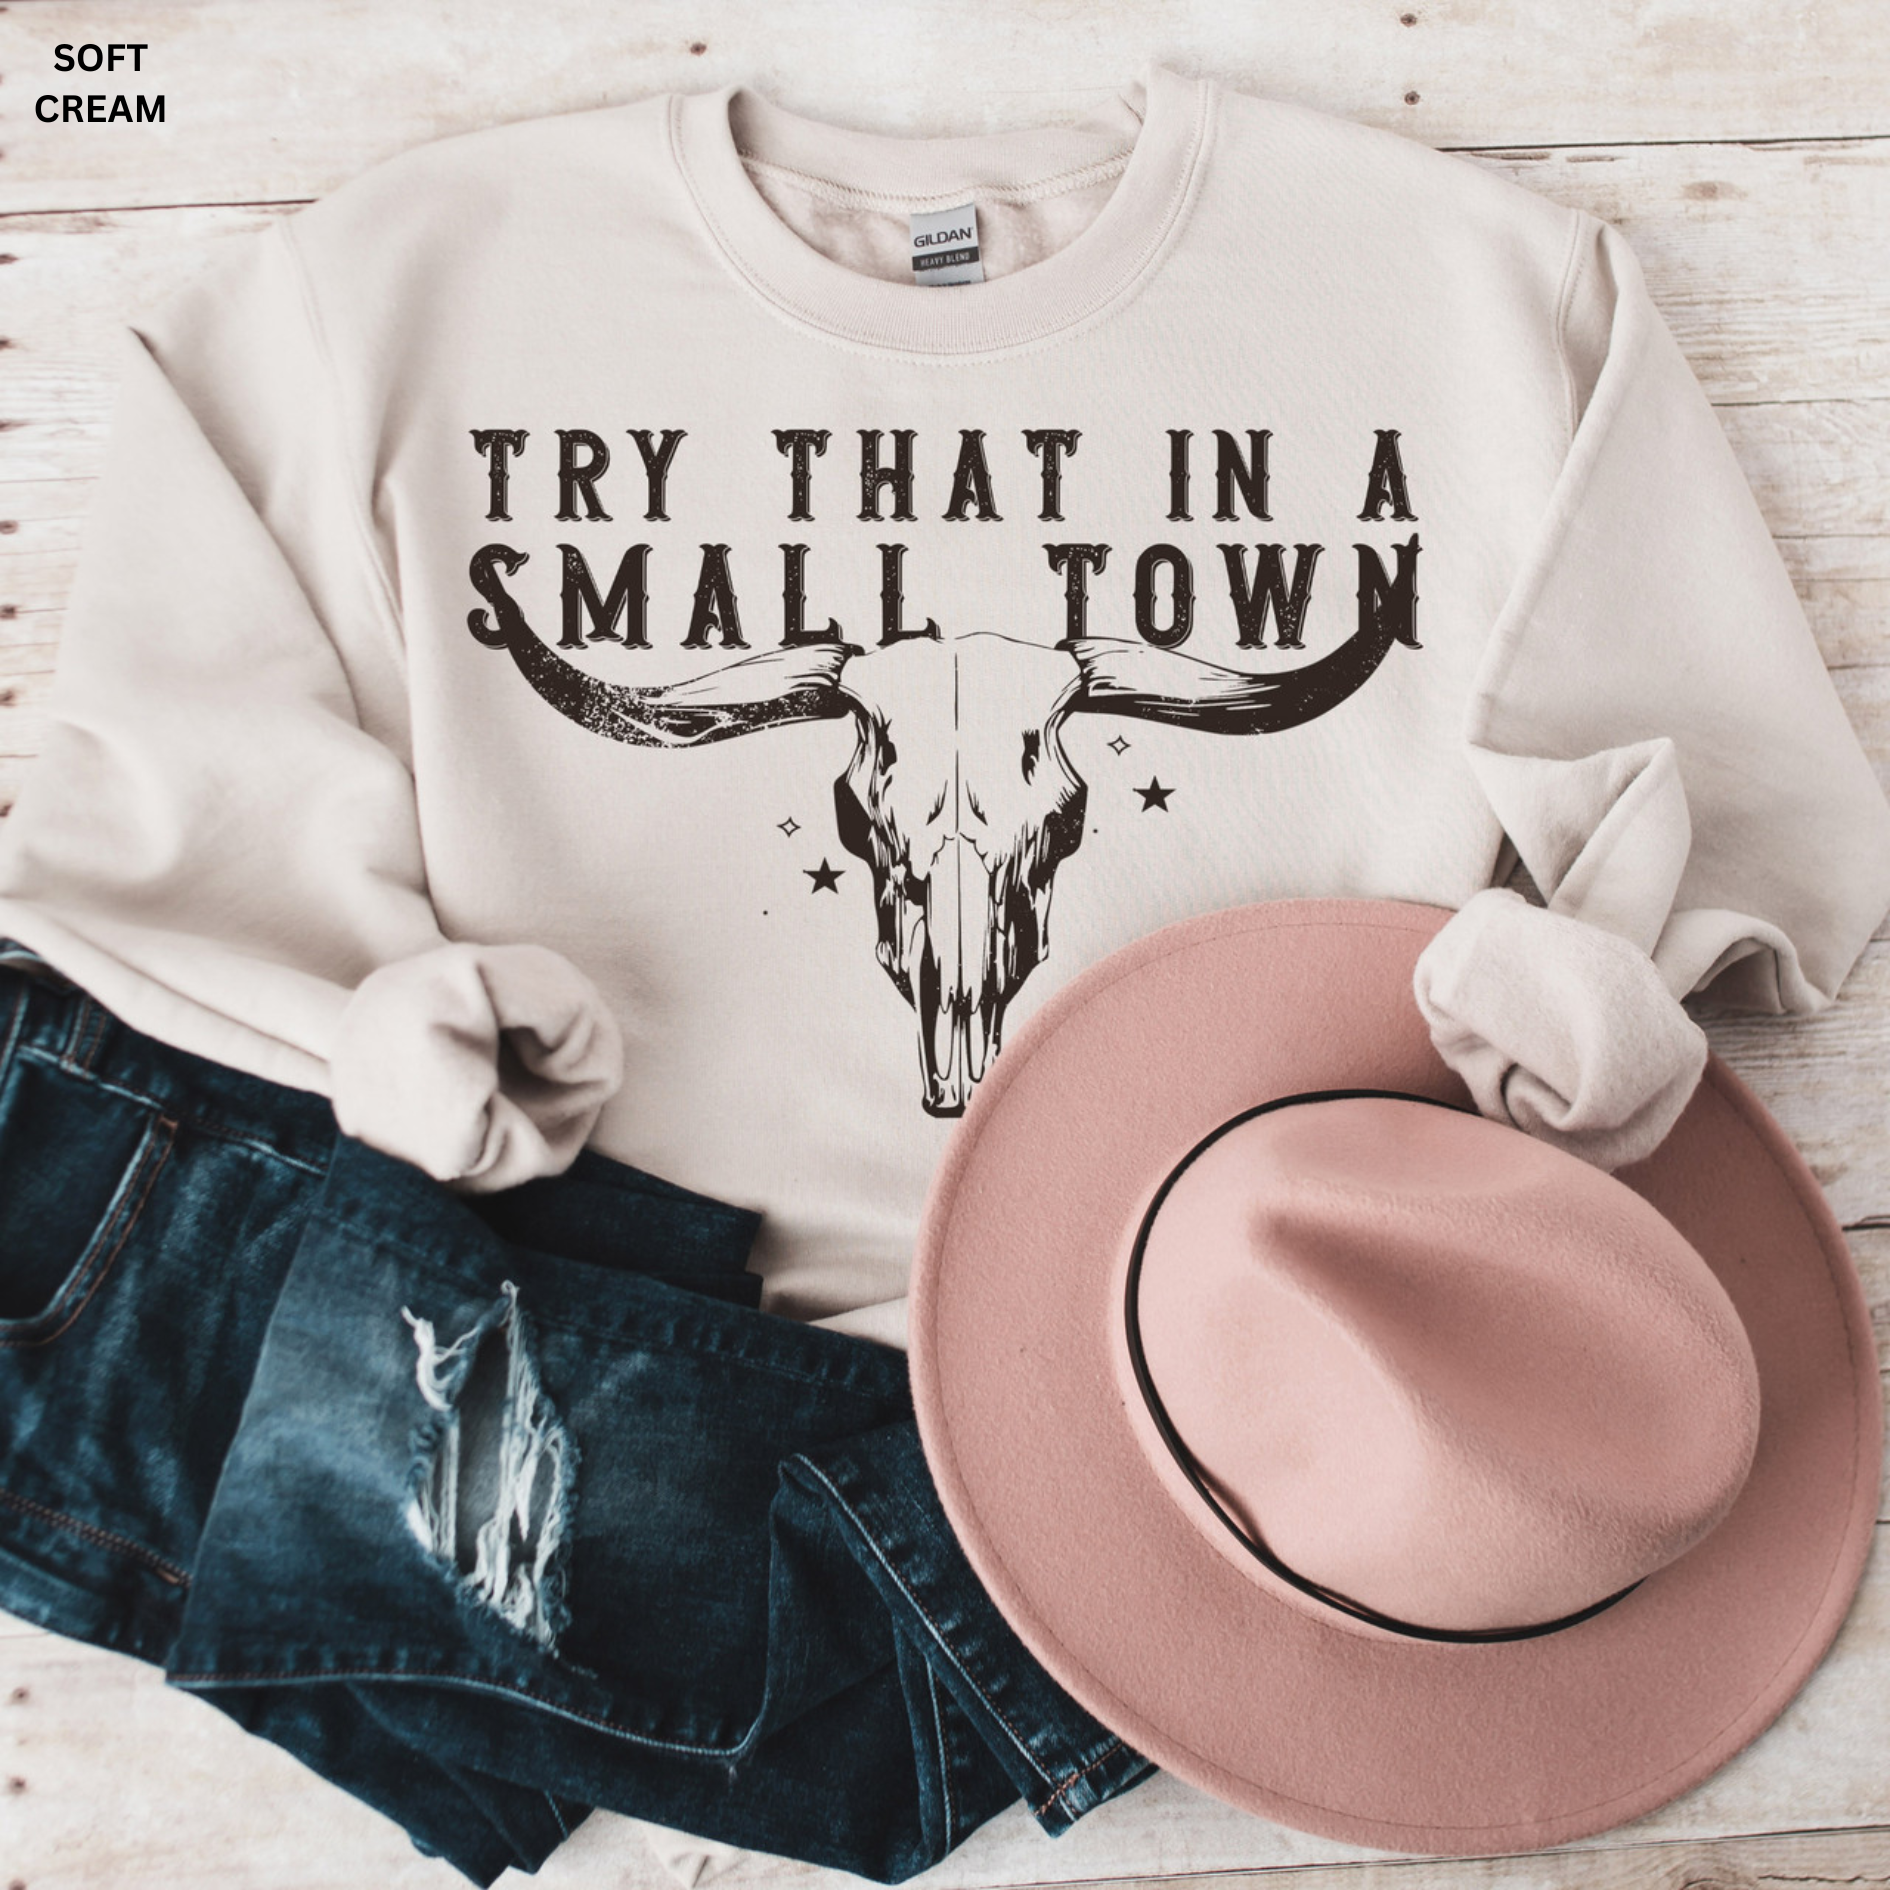 Try That in a Small Town Hoodie Graphic Tee